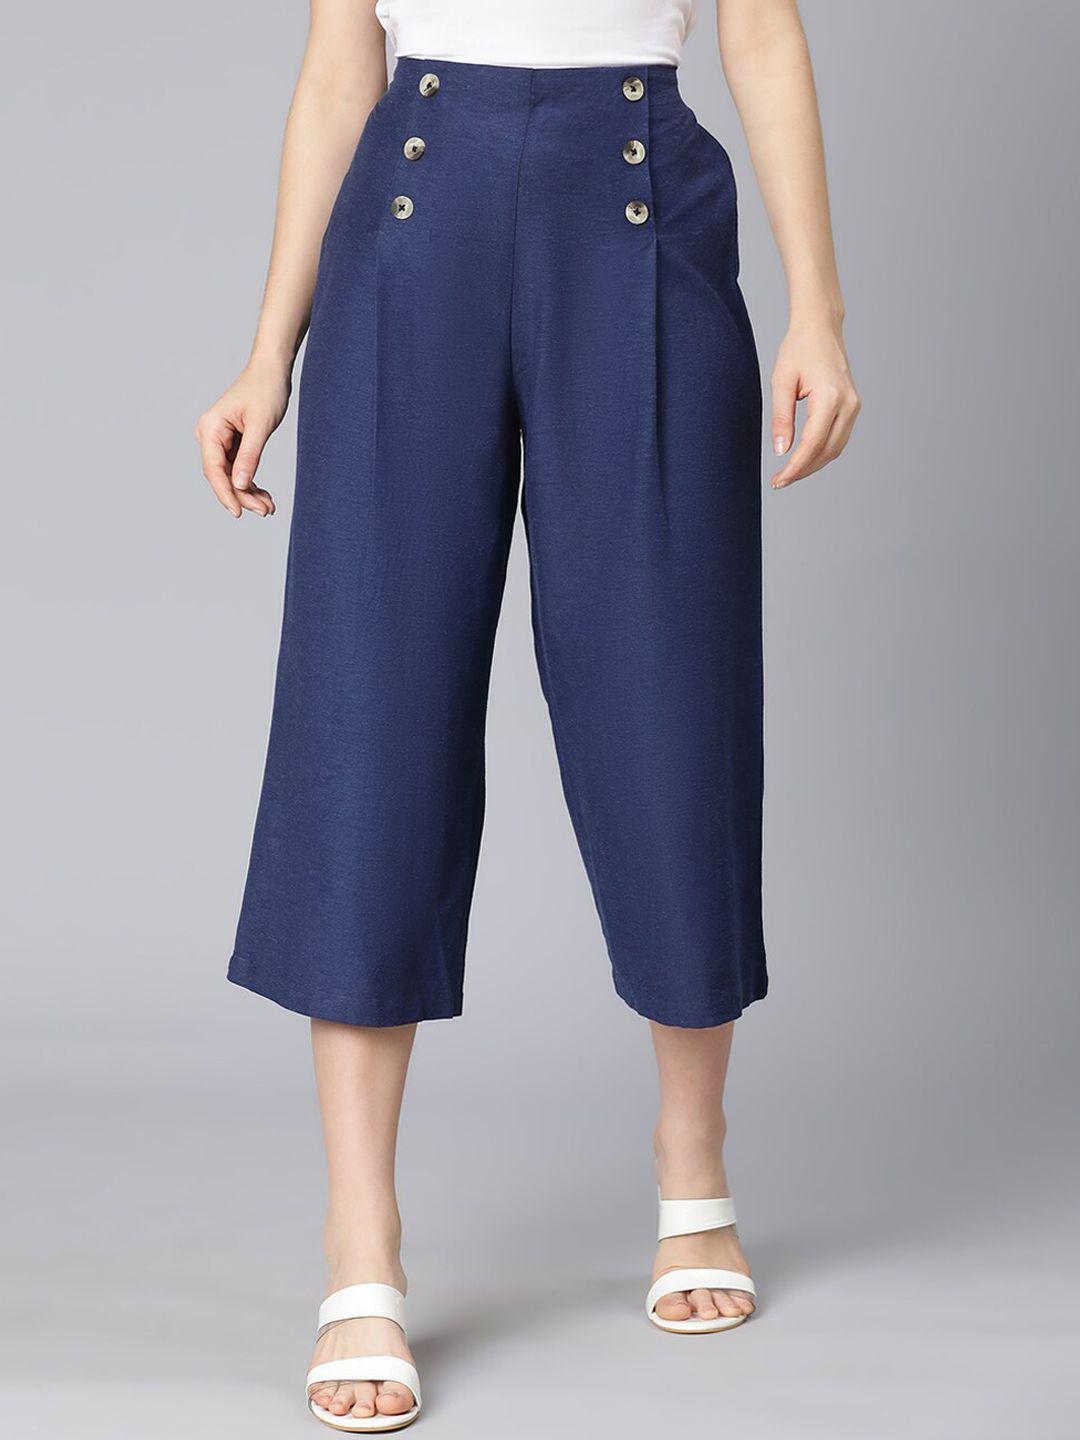 Oxolloxo Women Navy Blue Straight Fit Pleated Culottes Trousers